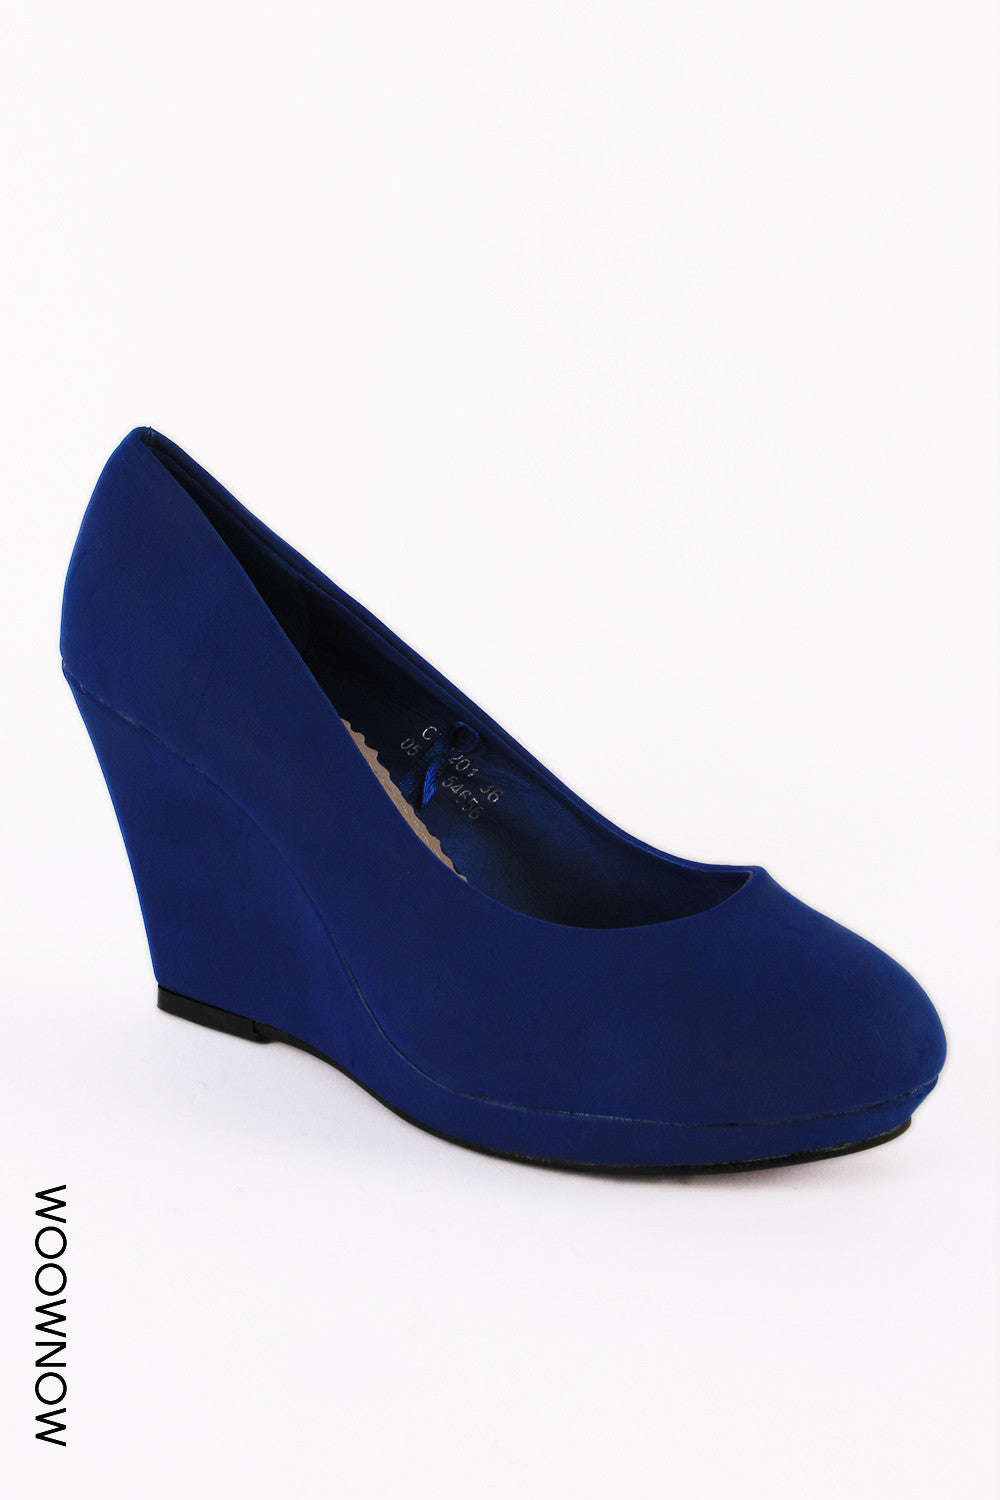 Sally Leather-Look Wedge Court Shoes